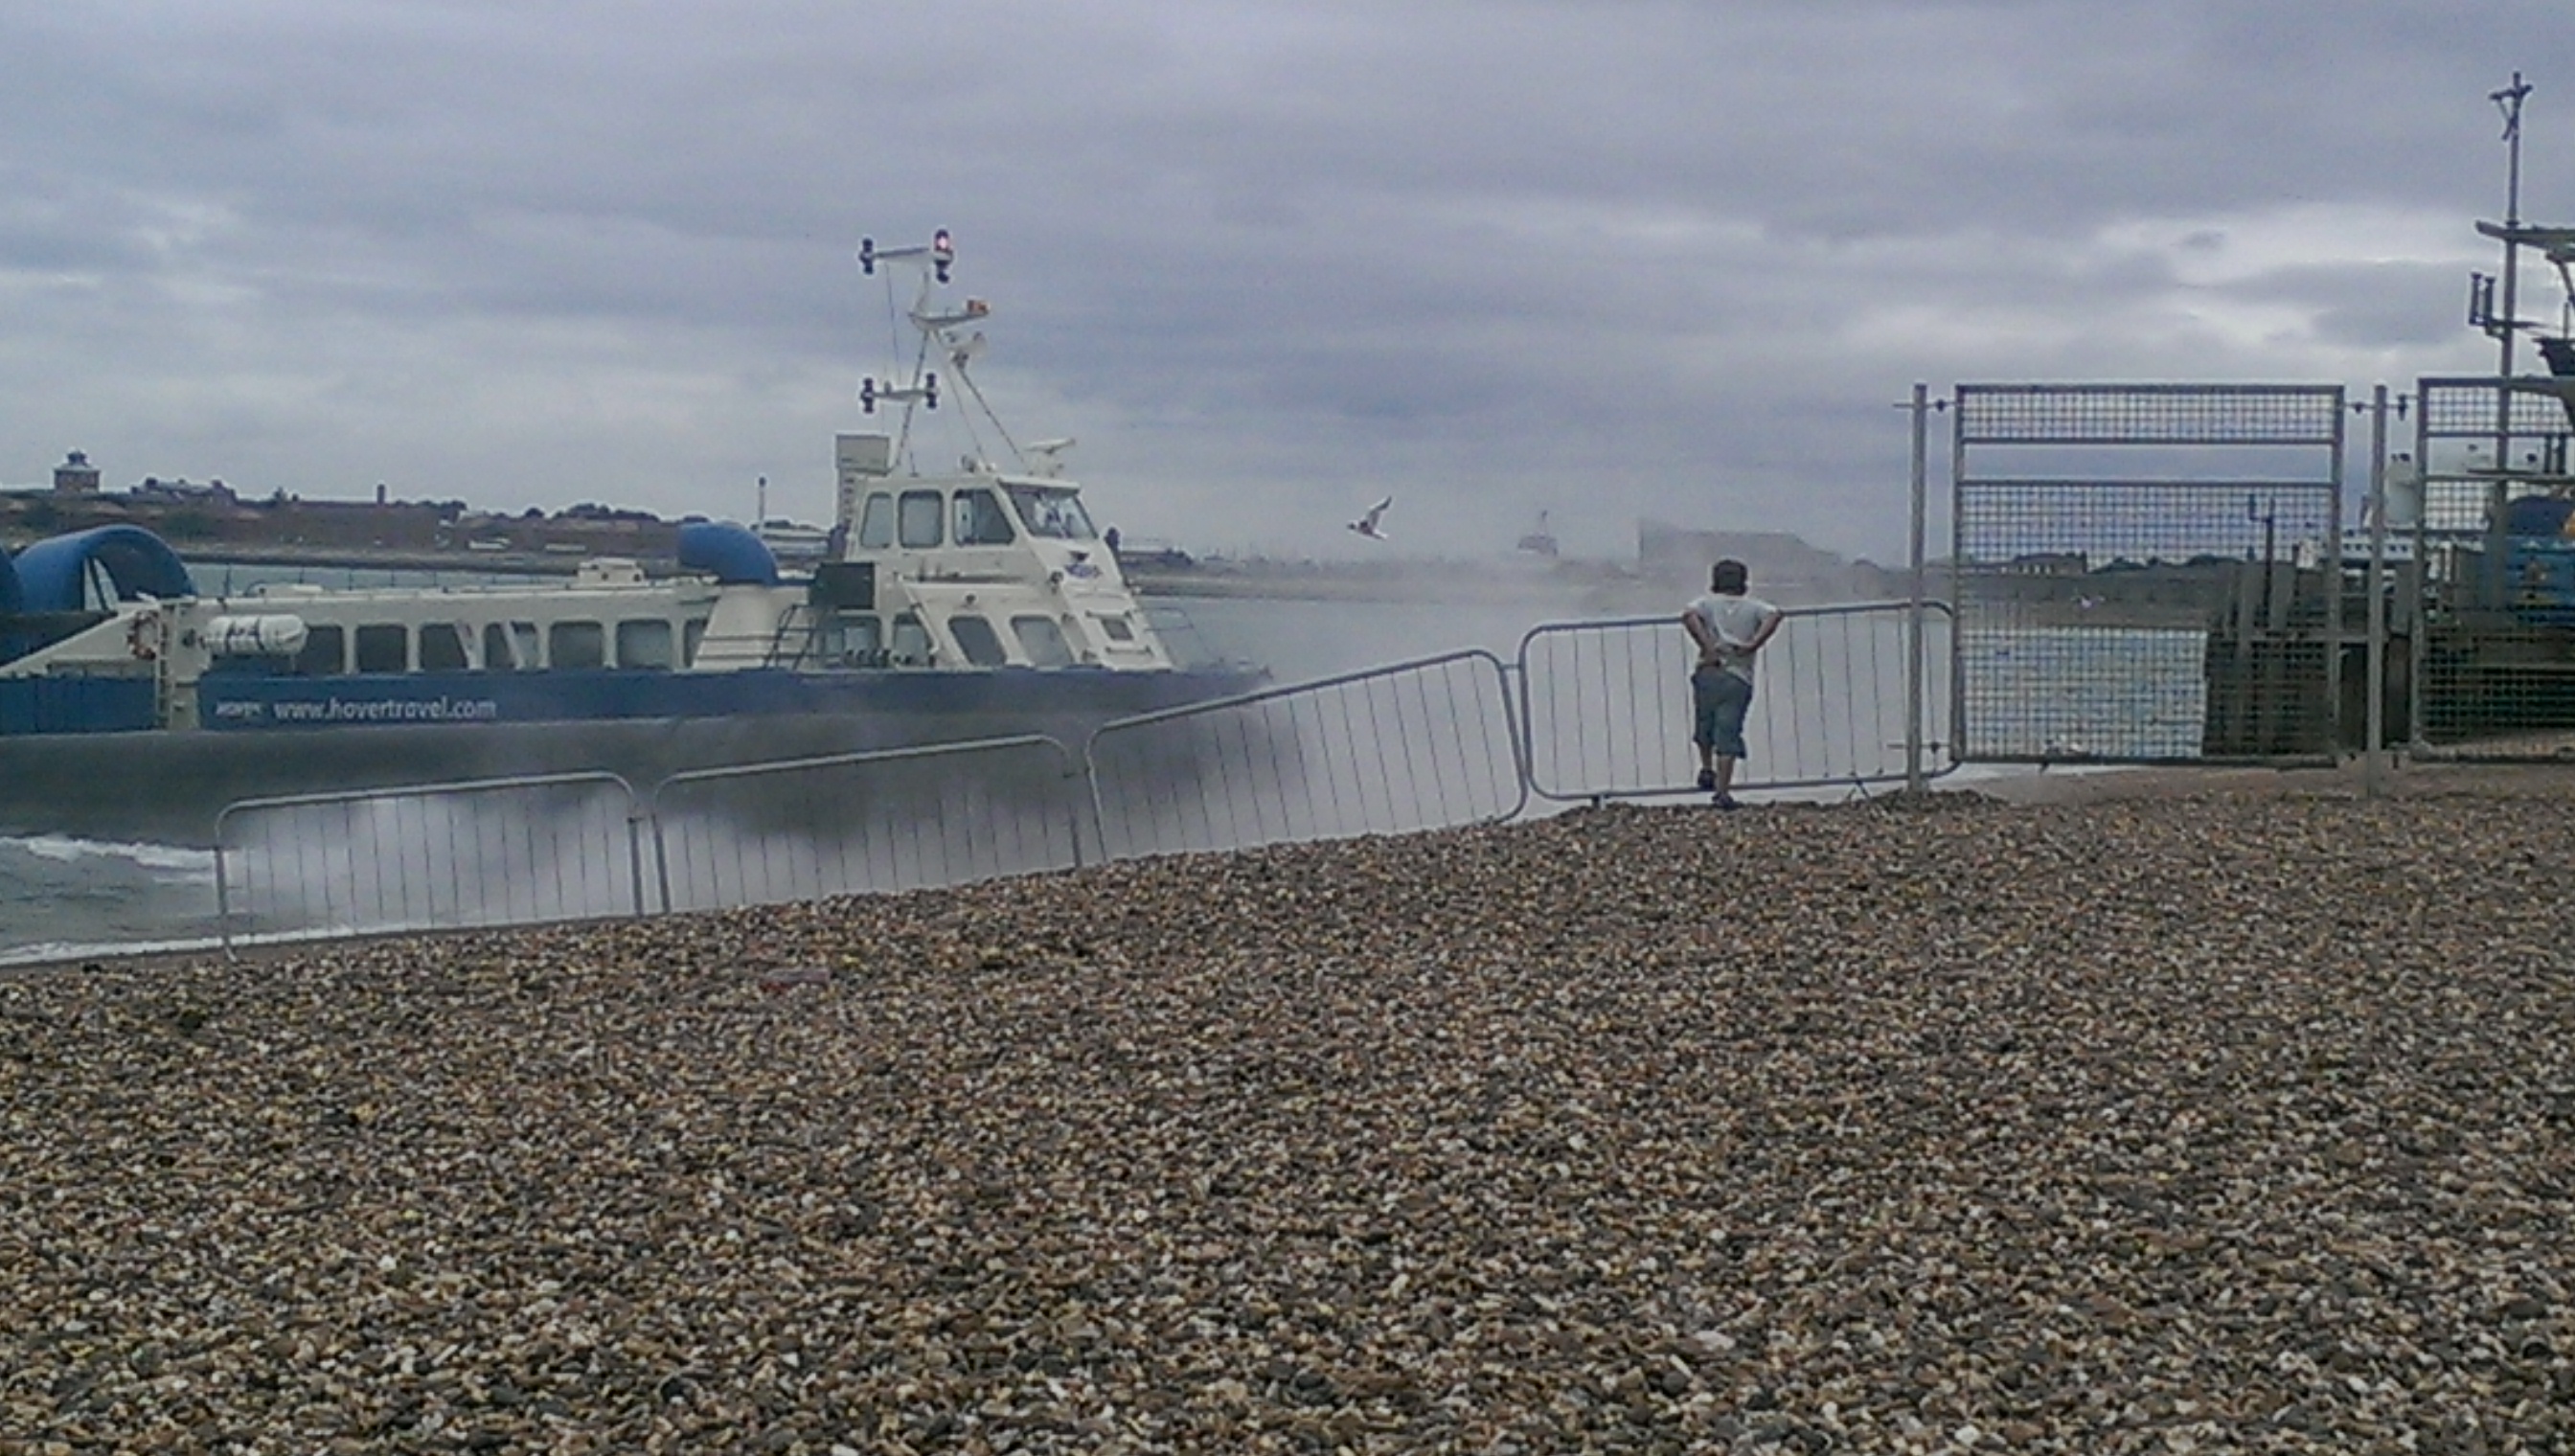 Hovercraft approaching Southsea terminal